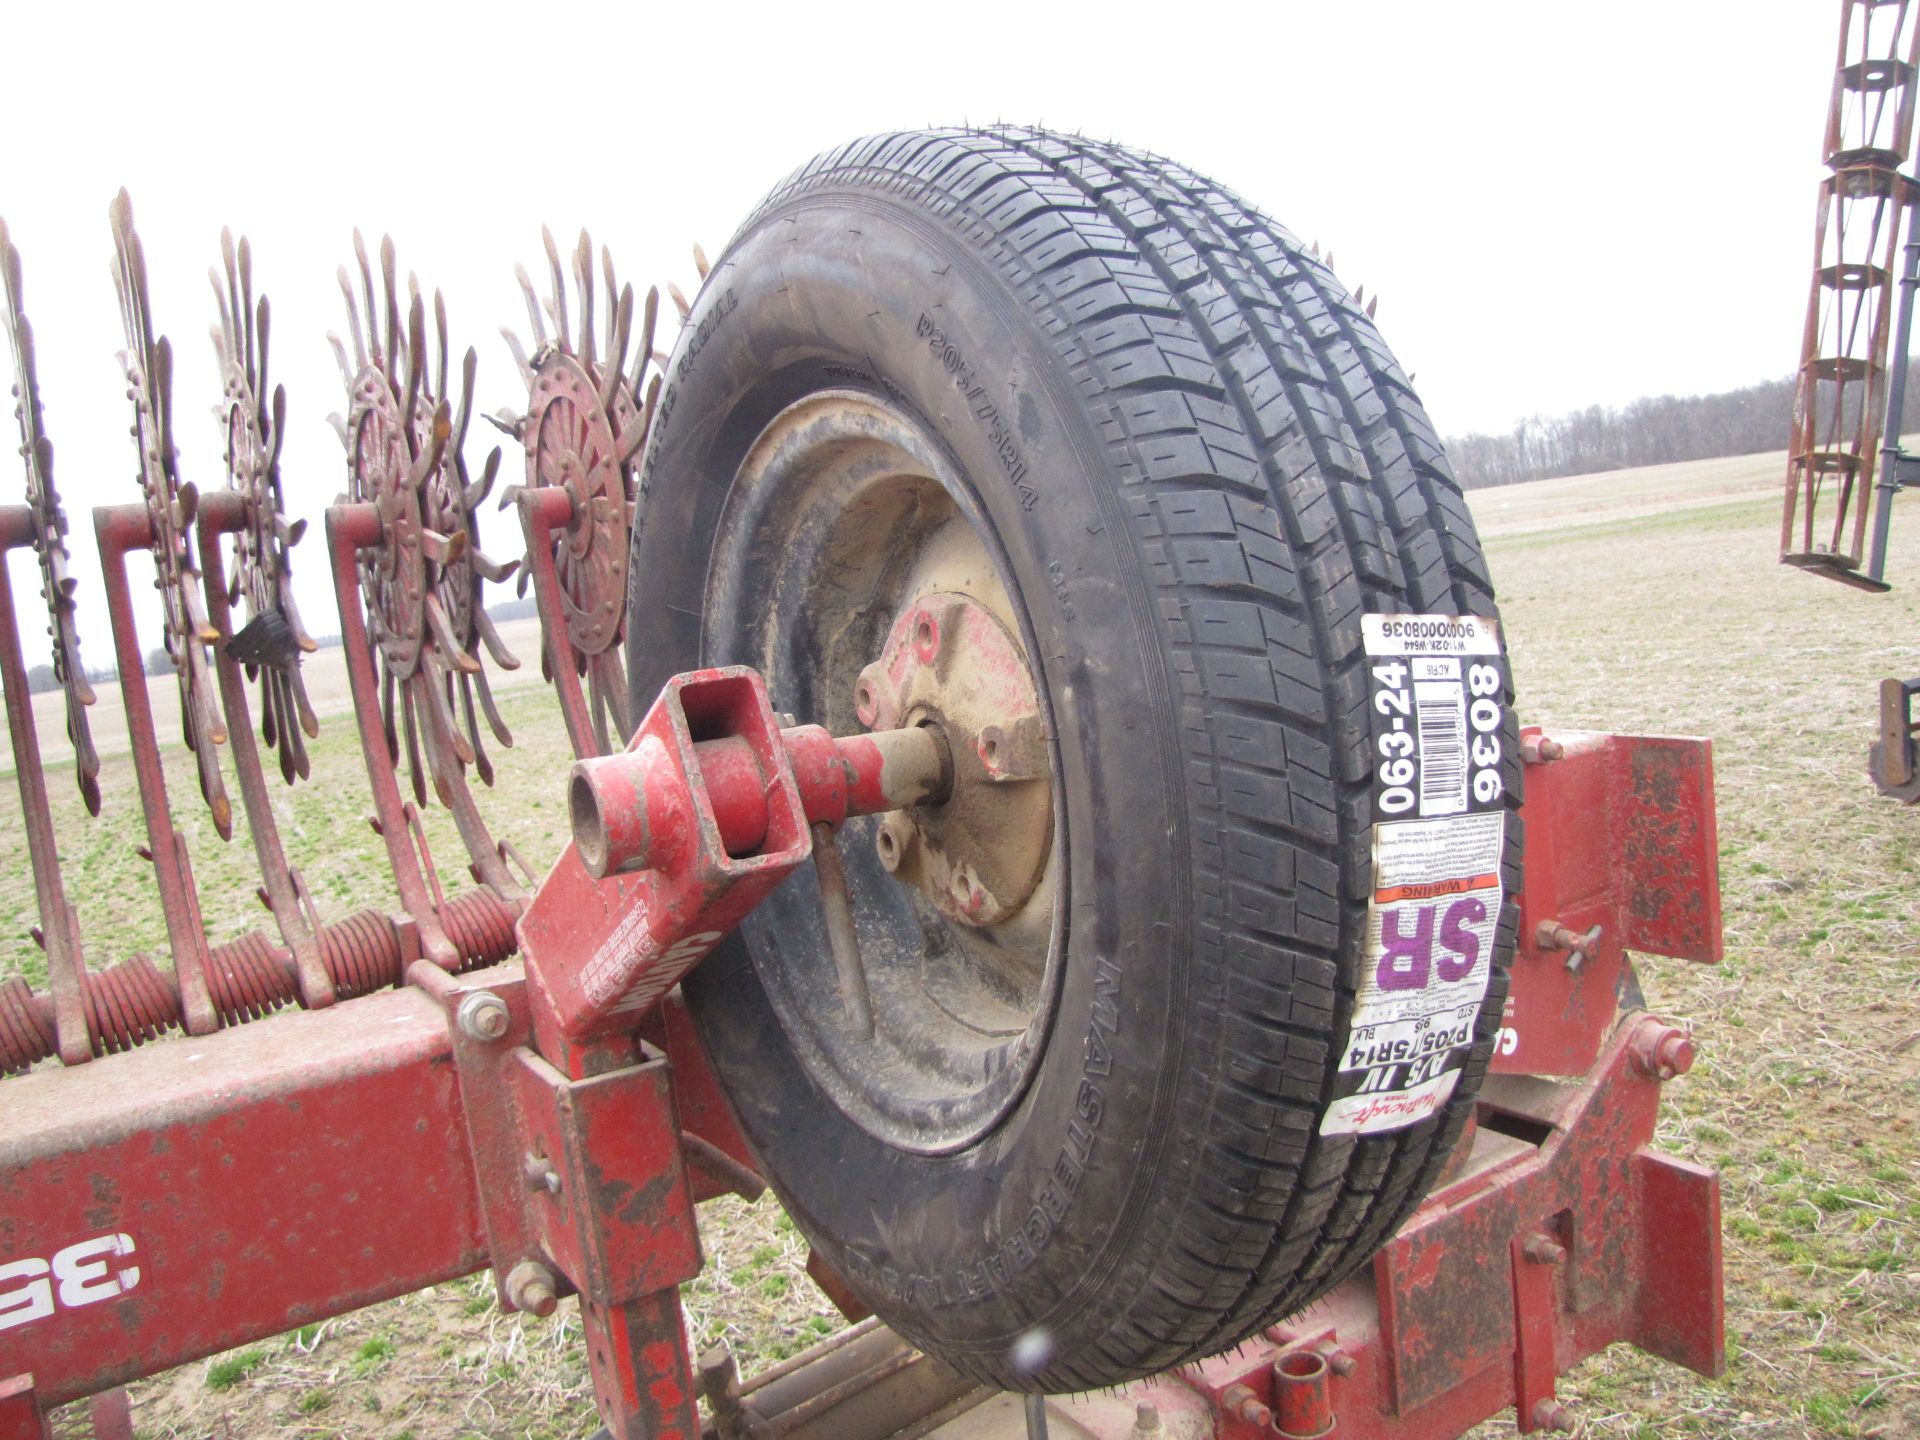 28' Yetter 3528 Rotary Hoe - Image 16 of 19